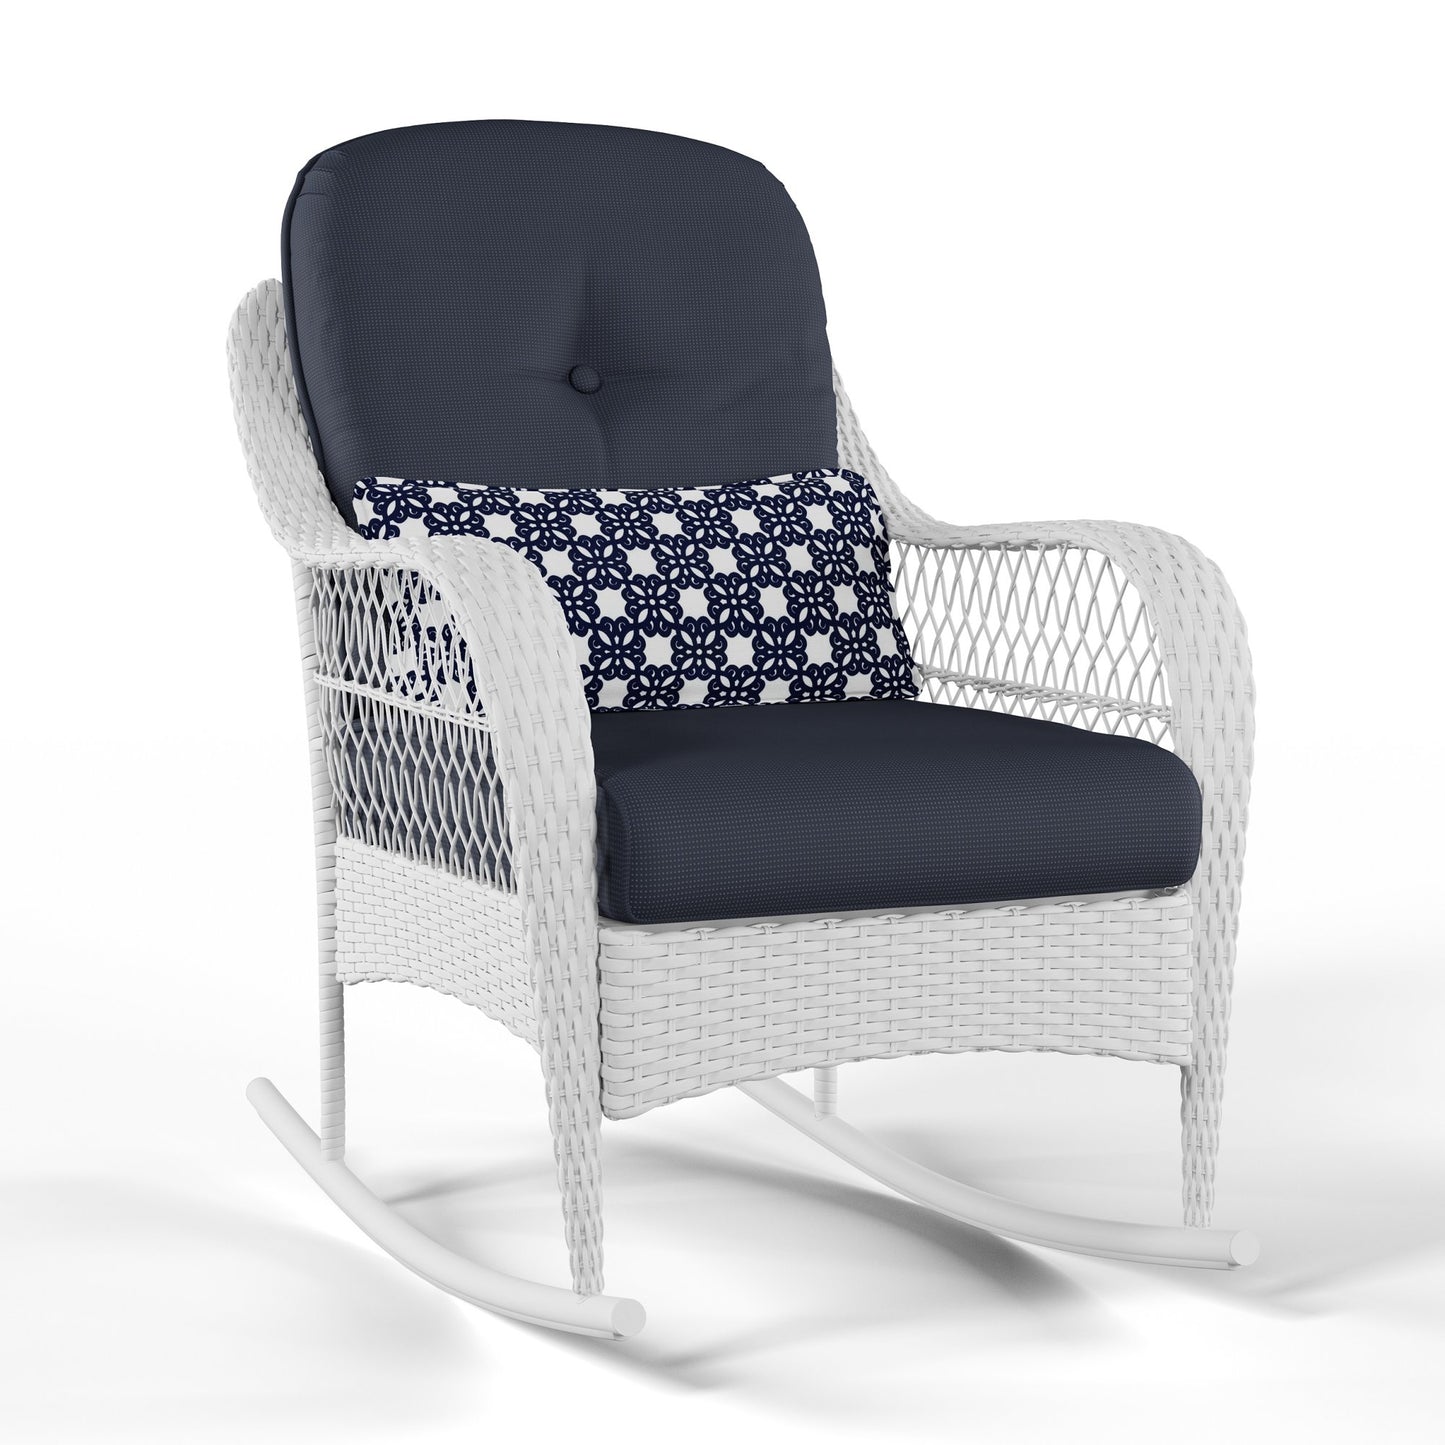 Outdoor rocking chair 50 x 50 cm - SHP421